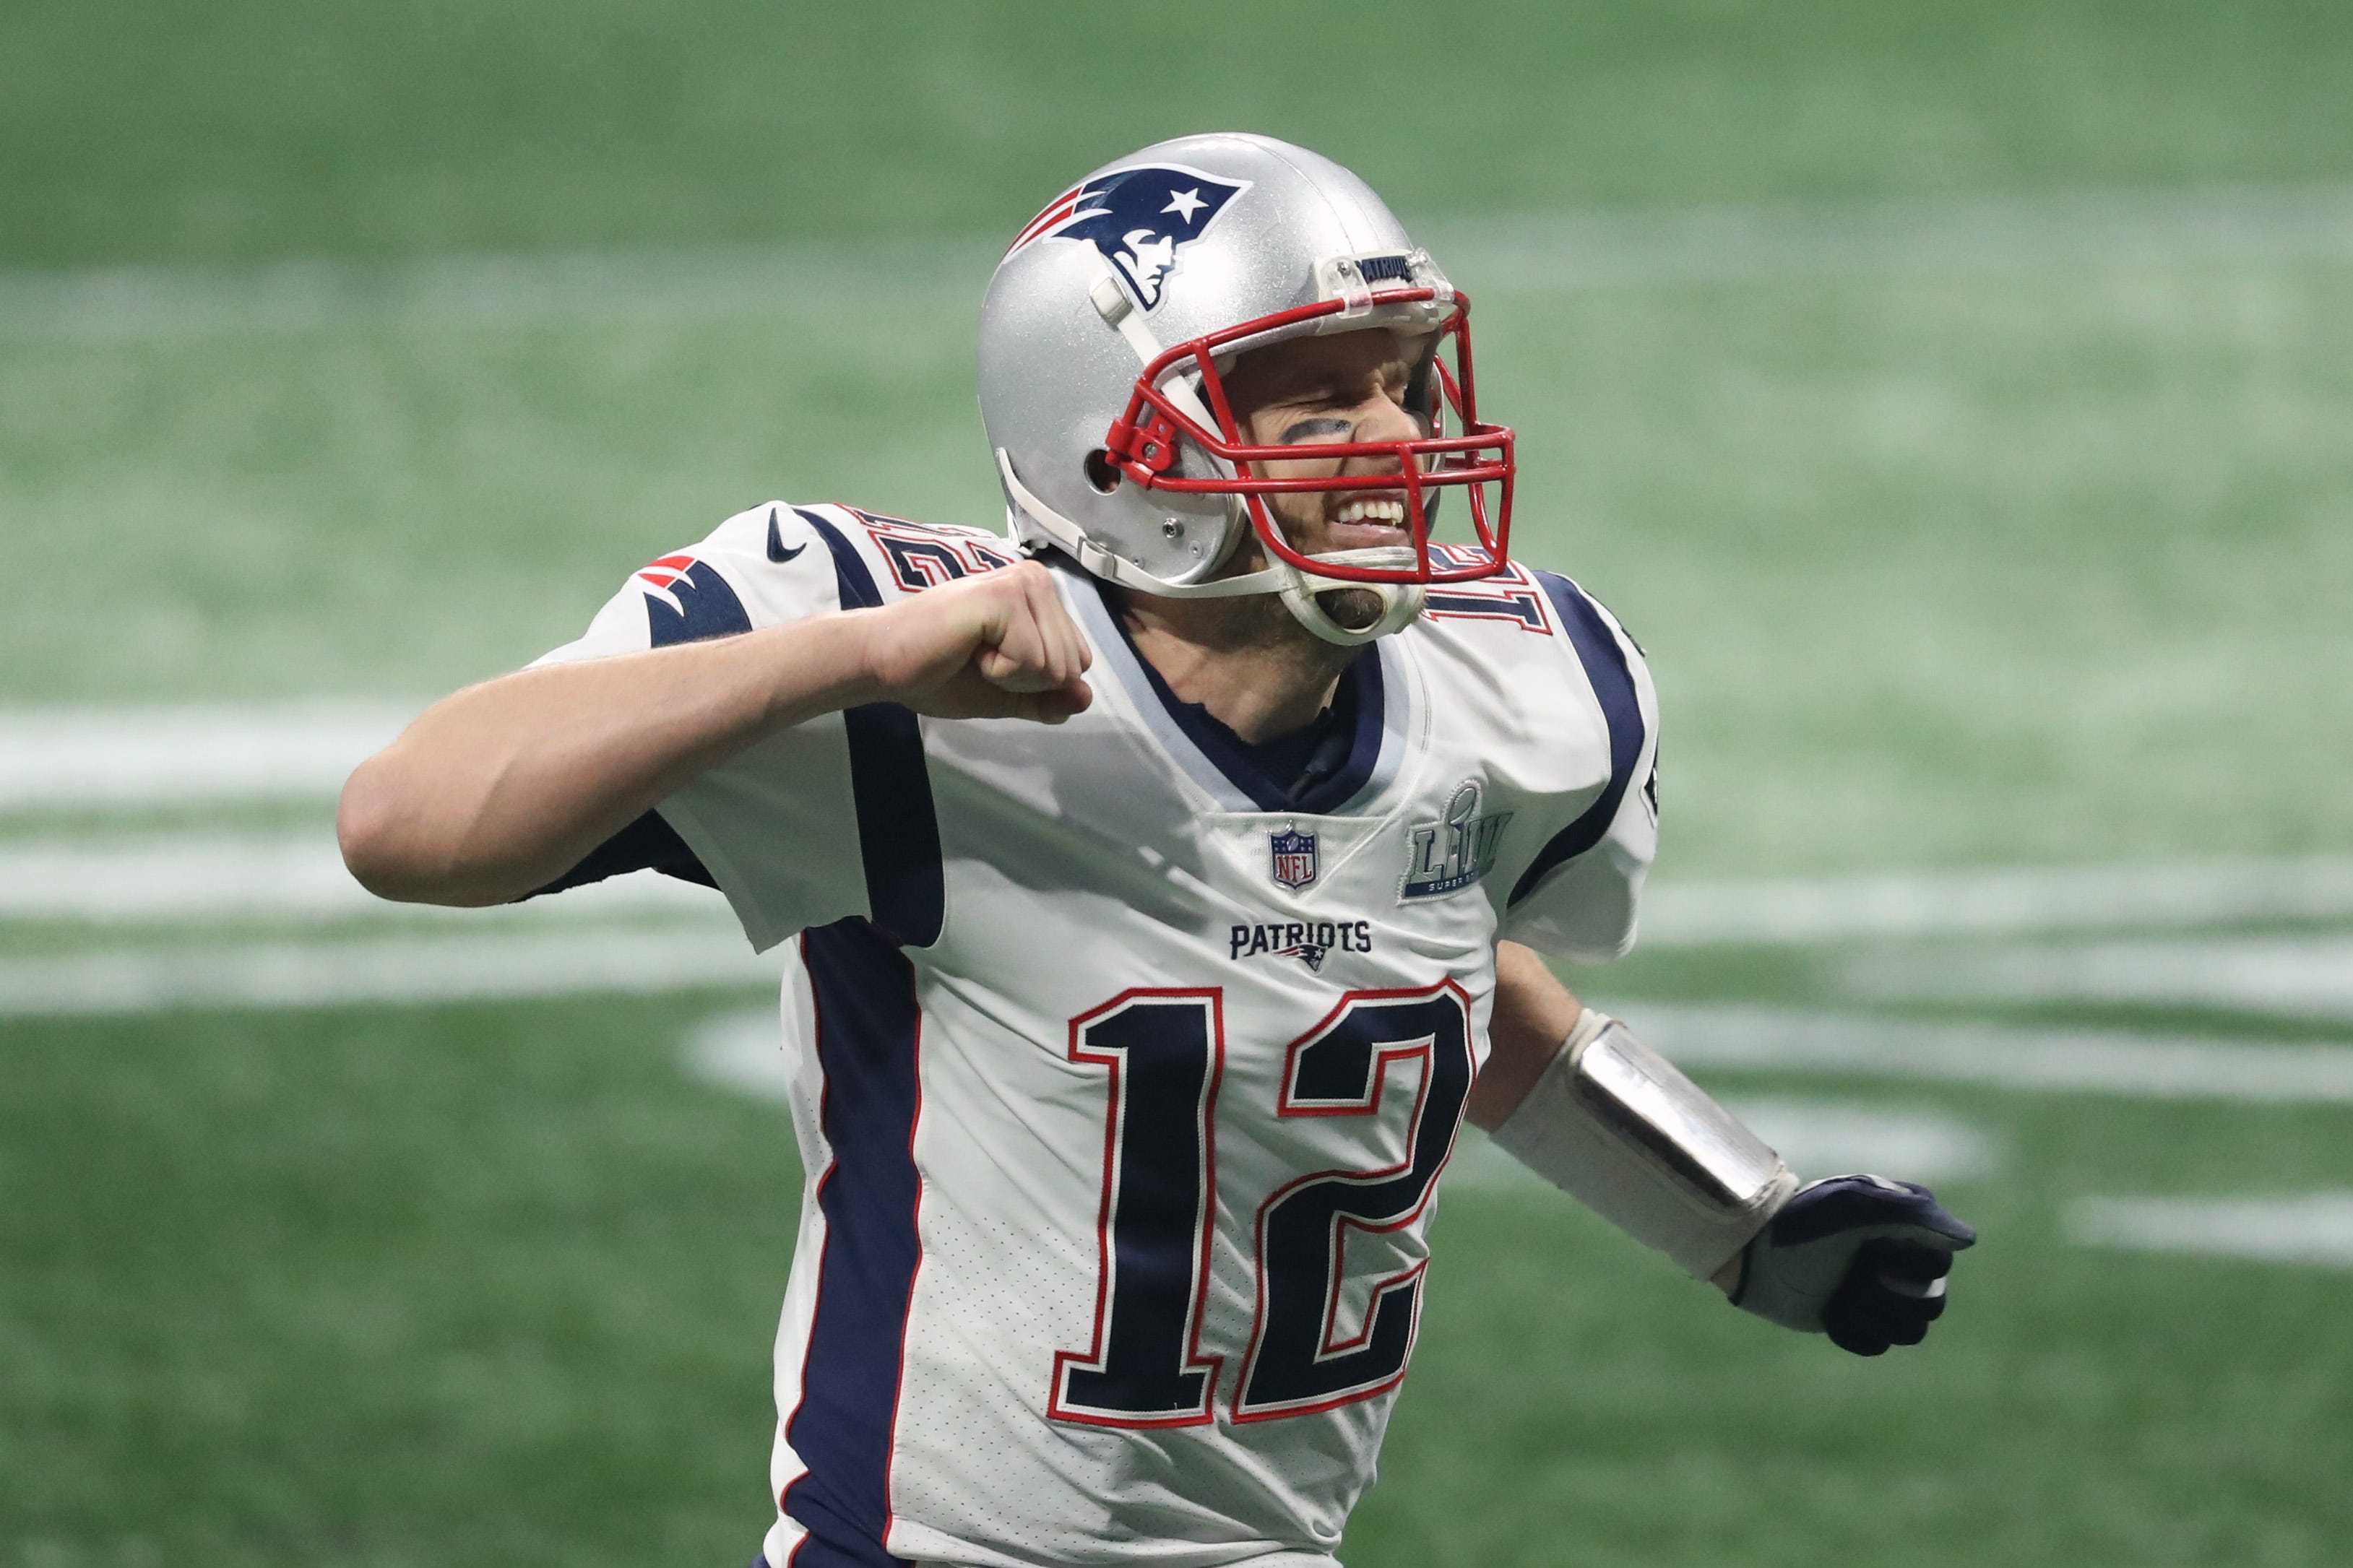 Super Bowl 2019: Tom Brady's performance was his worst in winning ring